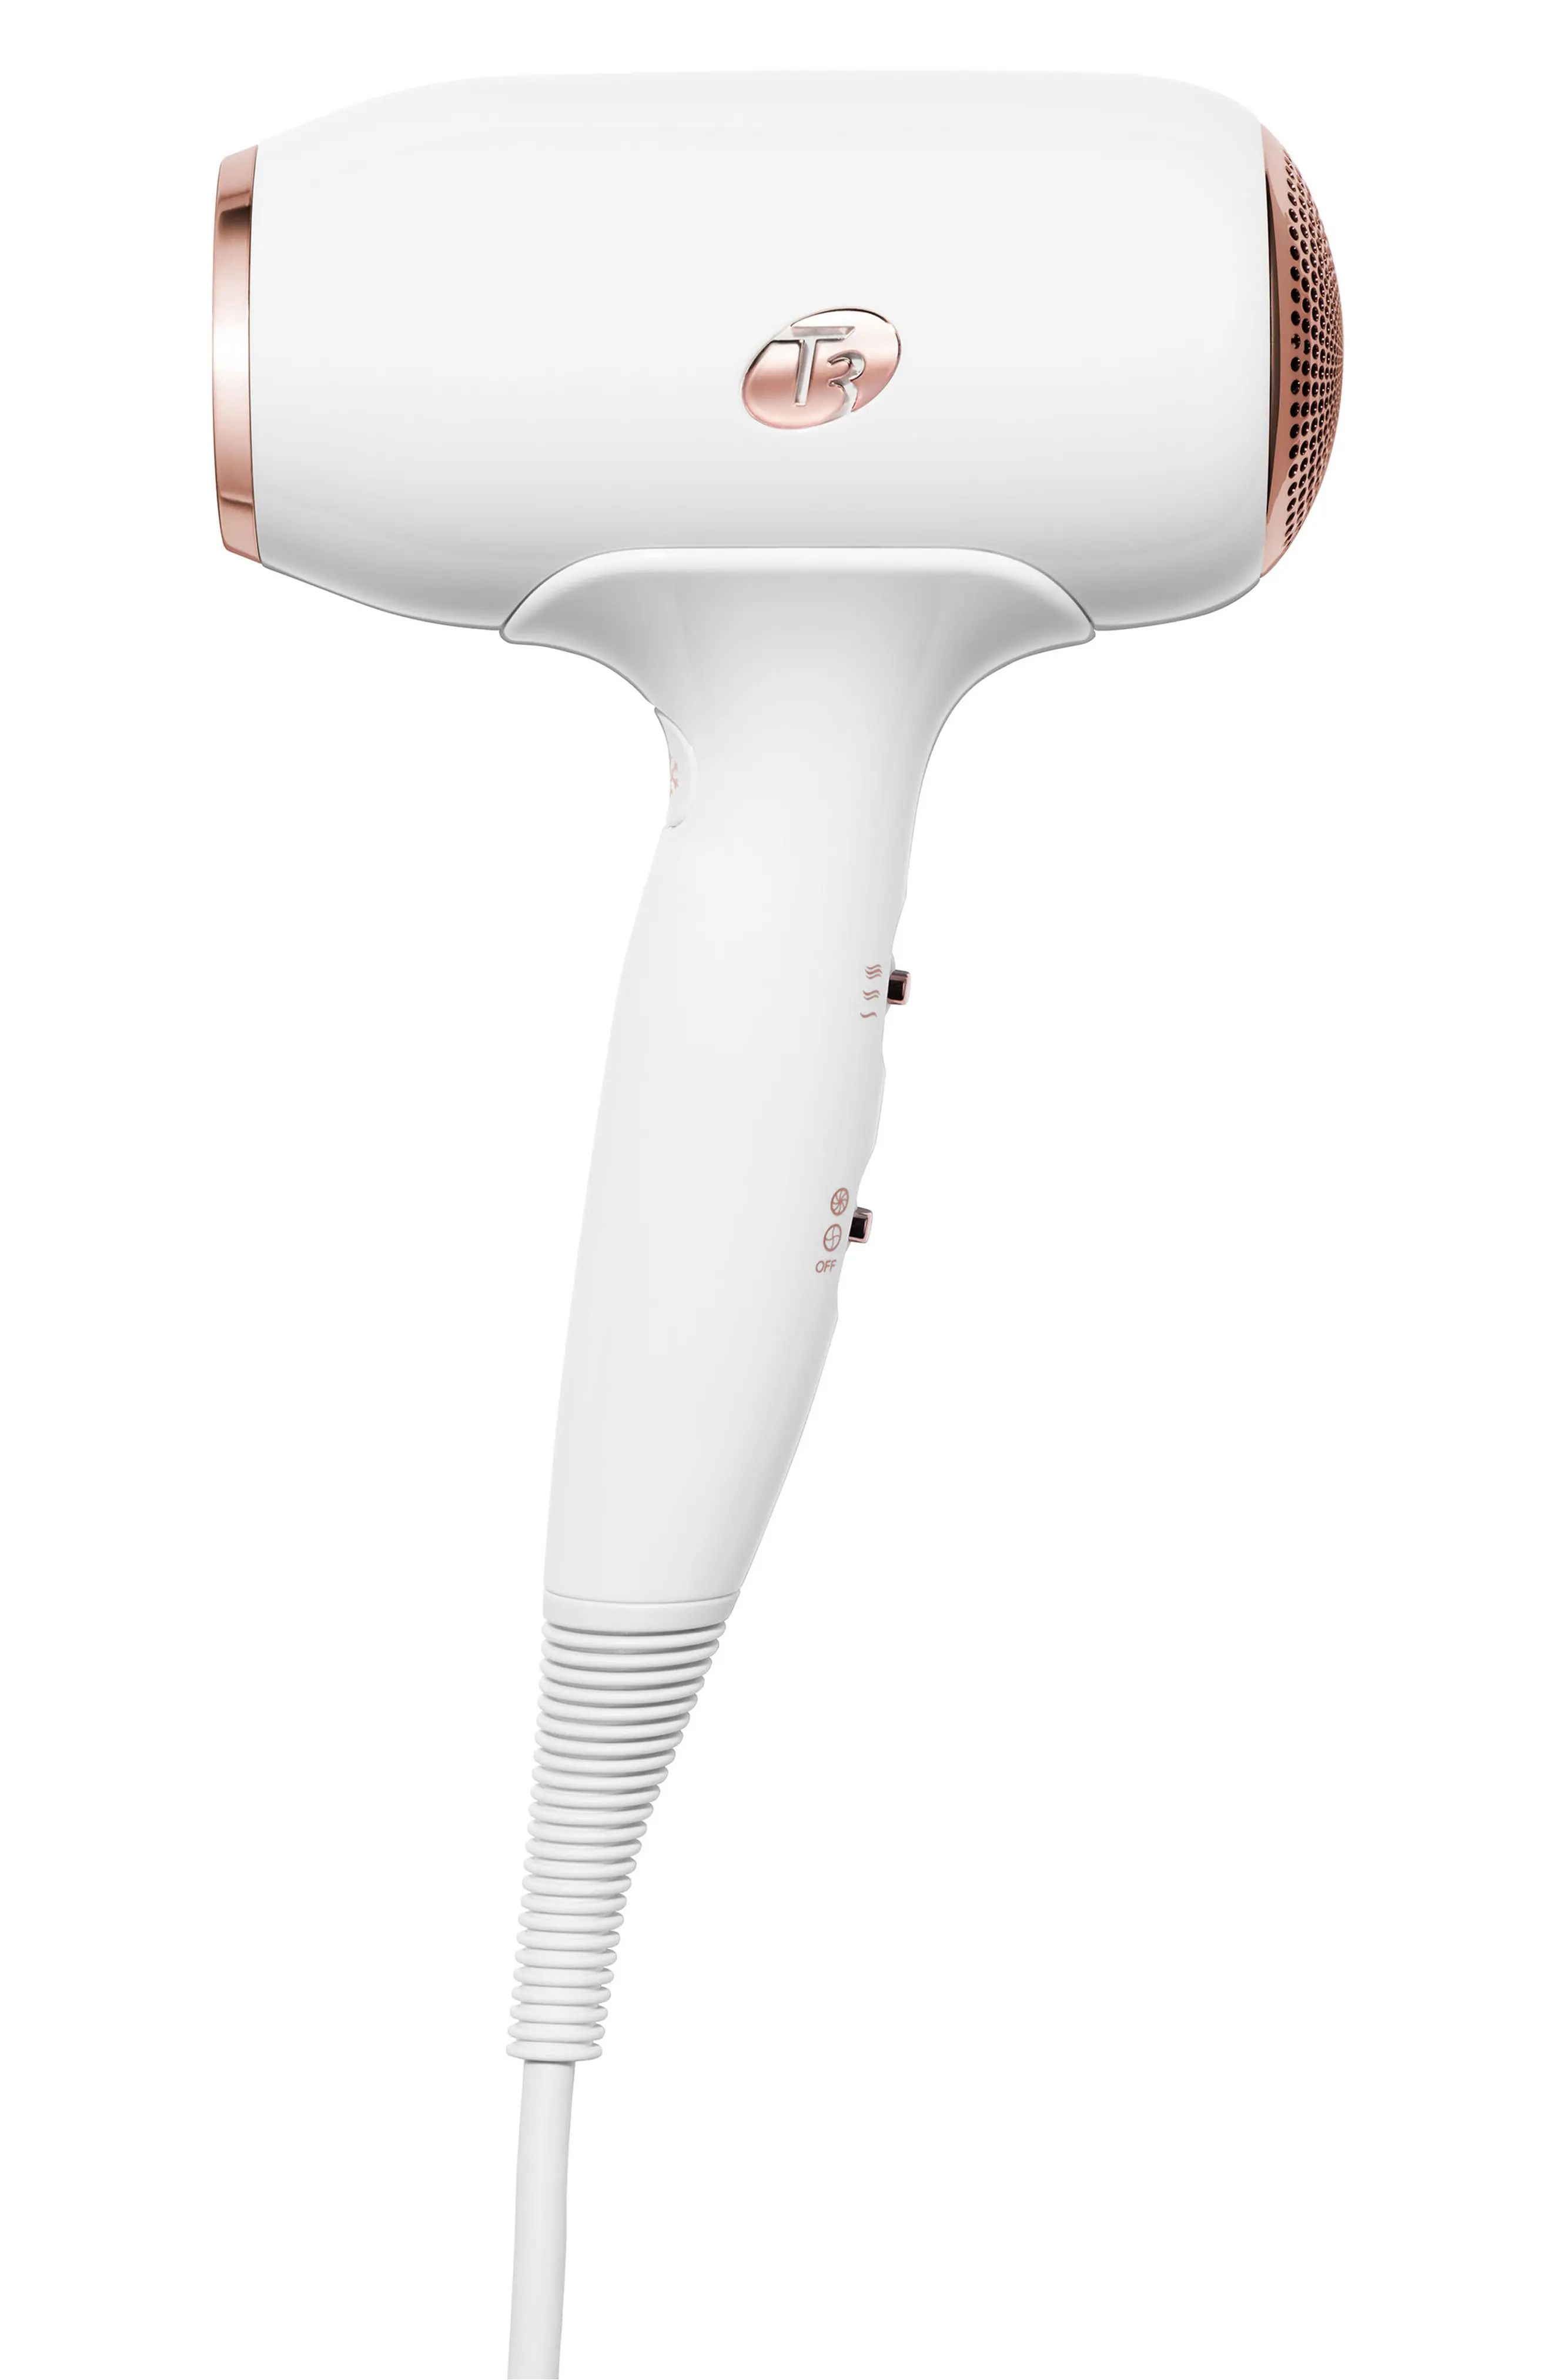 T3 Fit Compact Hair Dryer in Wrg at Nordstrom | Nordstrom